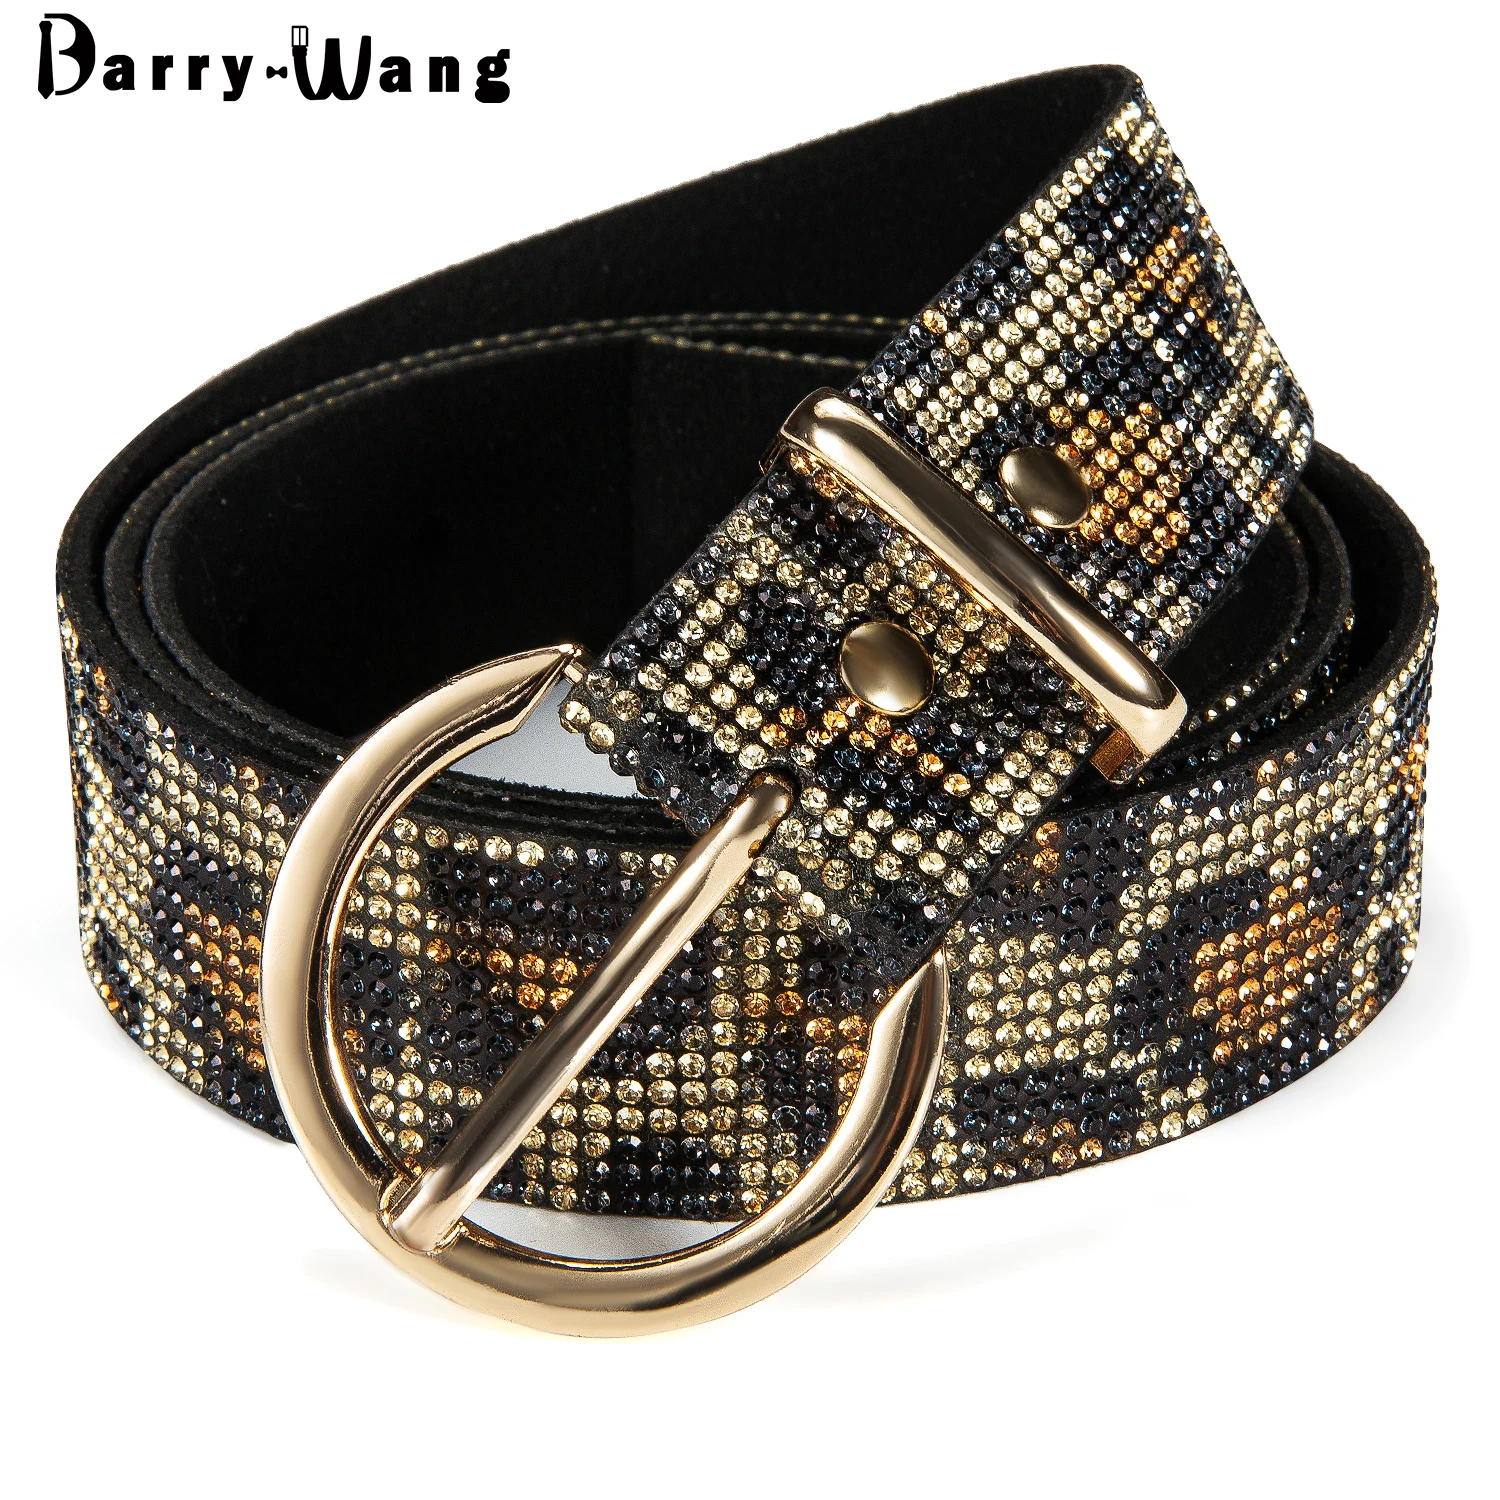 Barry.Wang 2021 Luxury Brand Leather Belts for Women Diamond Black Personality Pin Buckle Ladies Retro Waist Belt Female Party